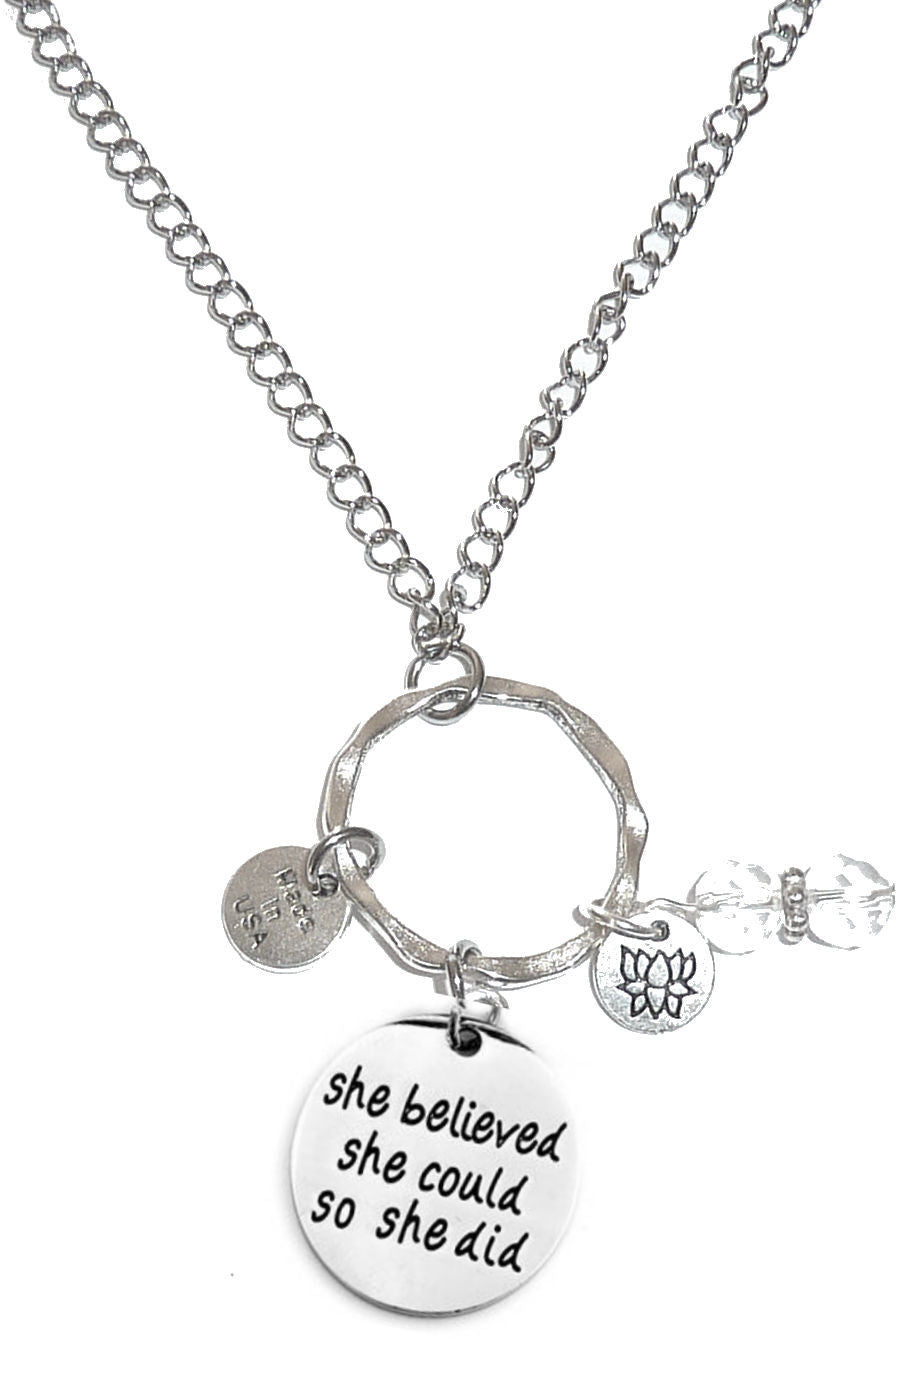 Rearview Mirror Charms - She Believed She Could, So She Did